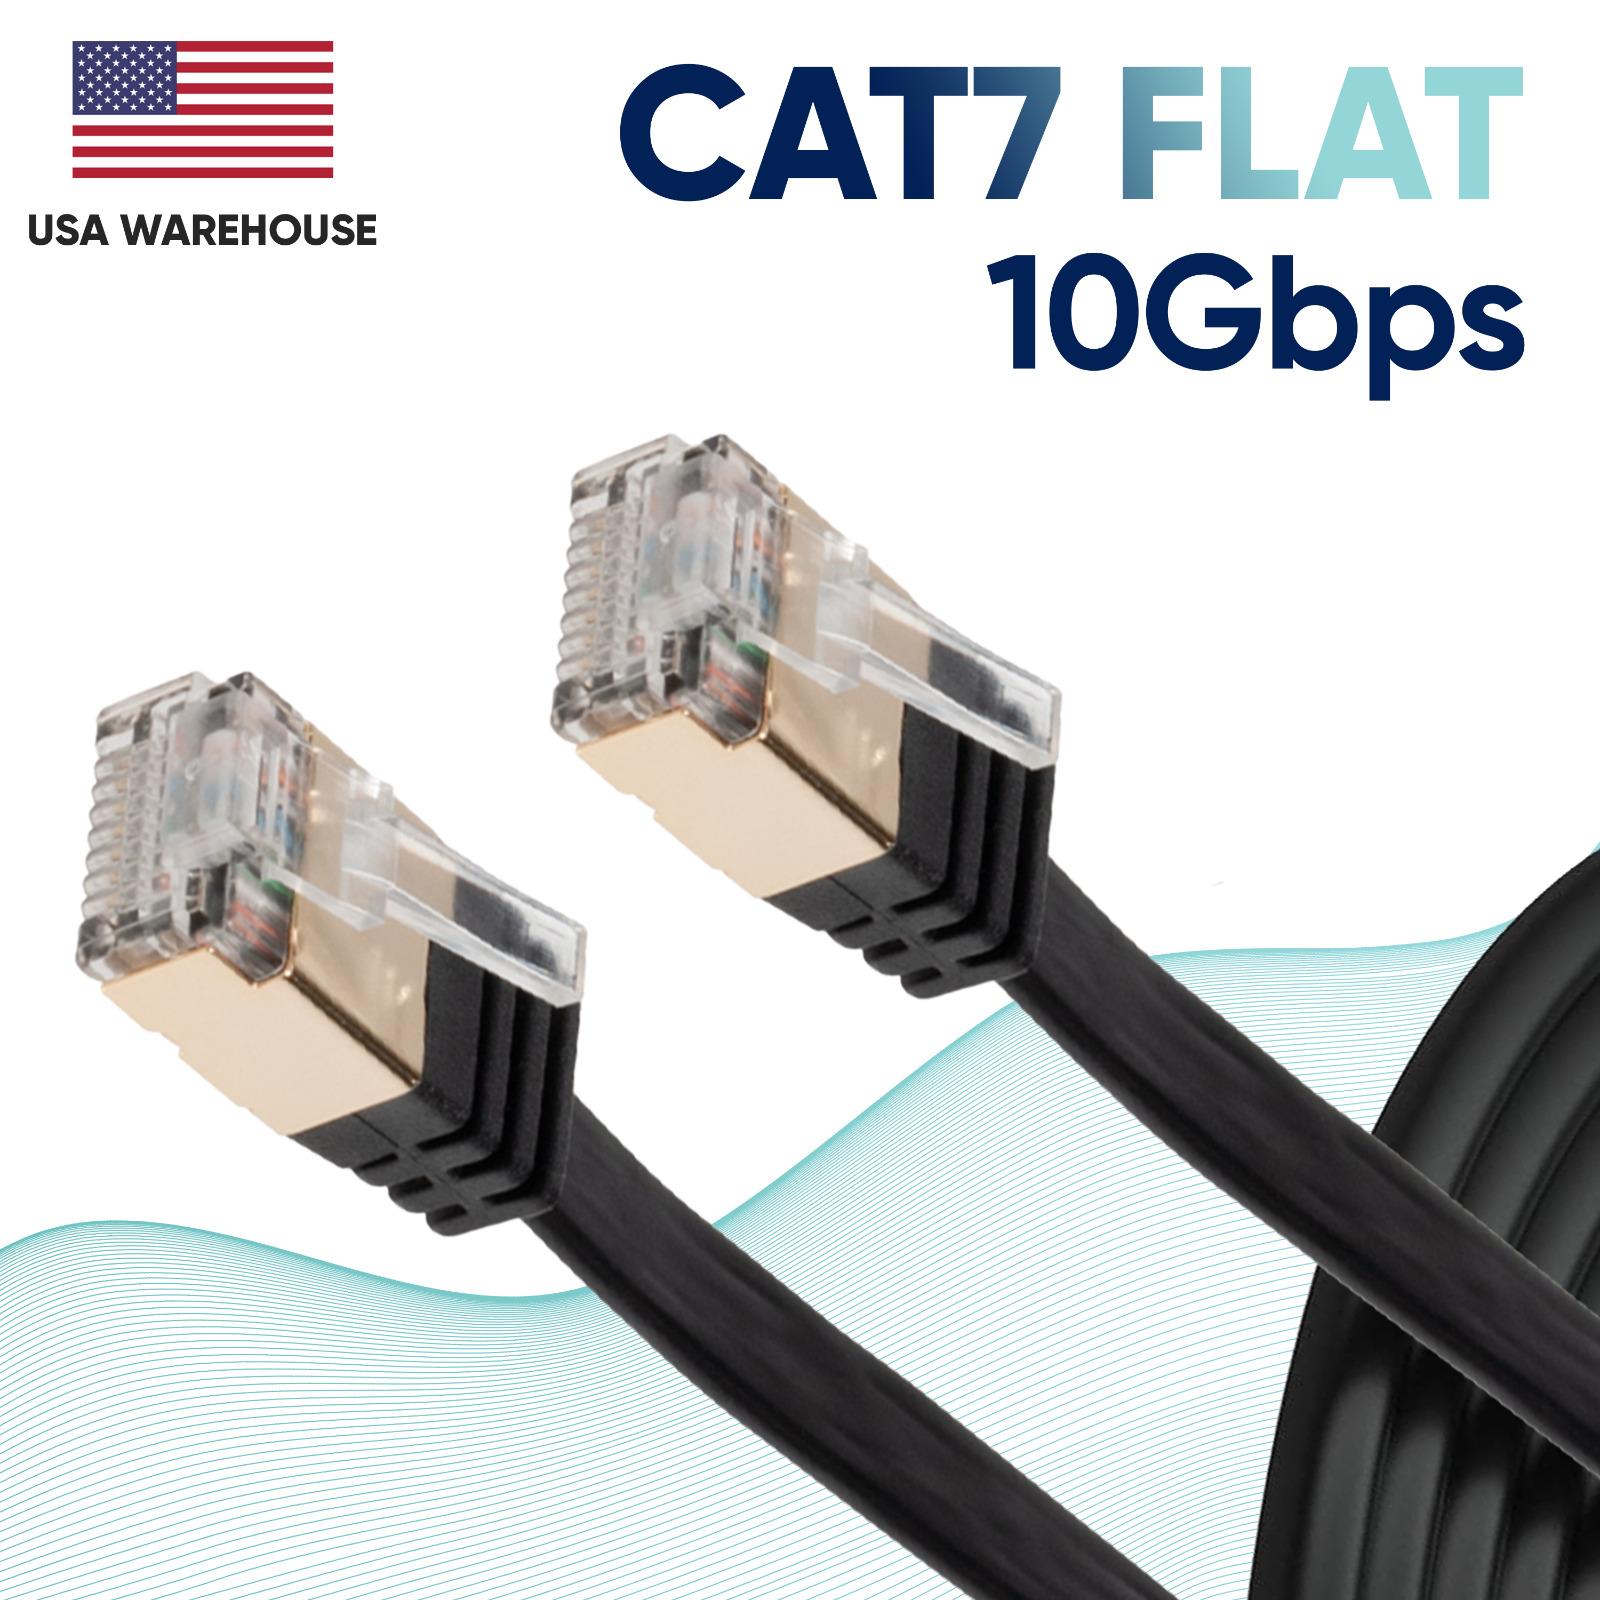 10Gbps CAT7 Flat Ethernet Internet LAN Cable Network 6 10 20 25 30 50 75 100 Lot